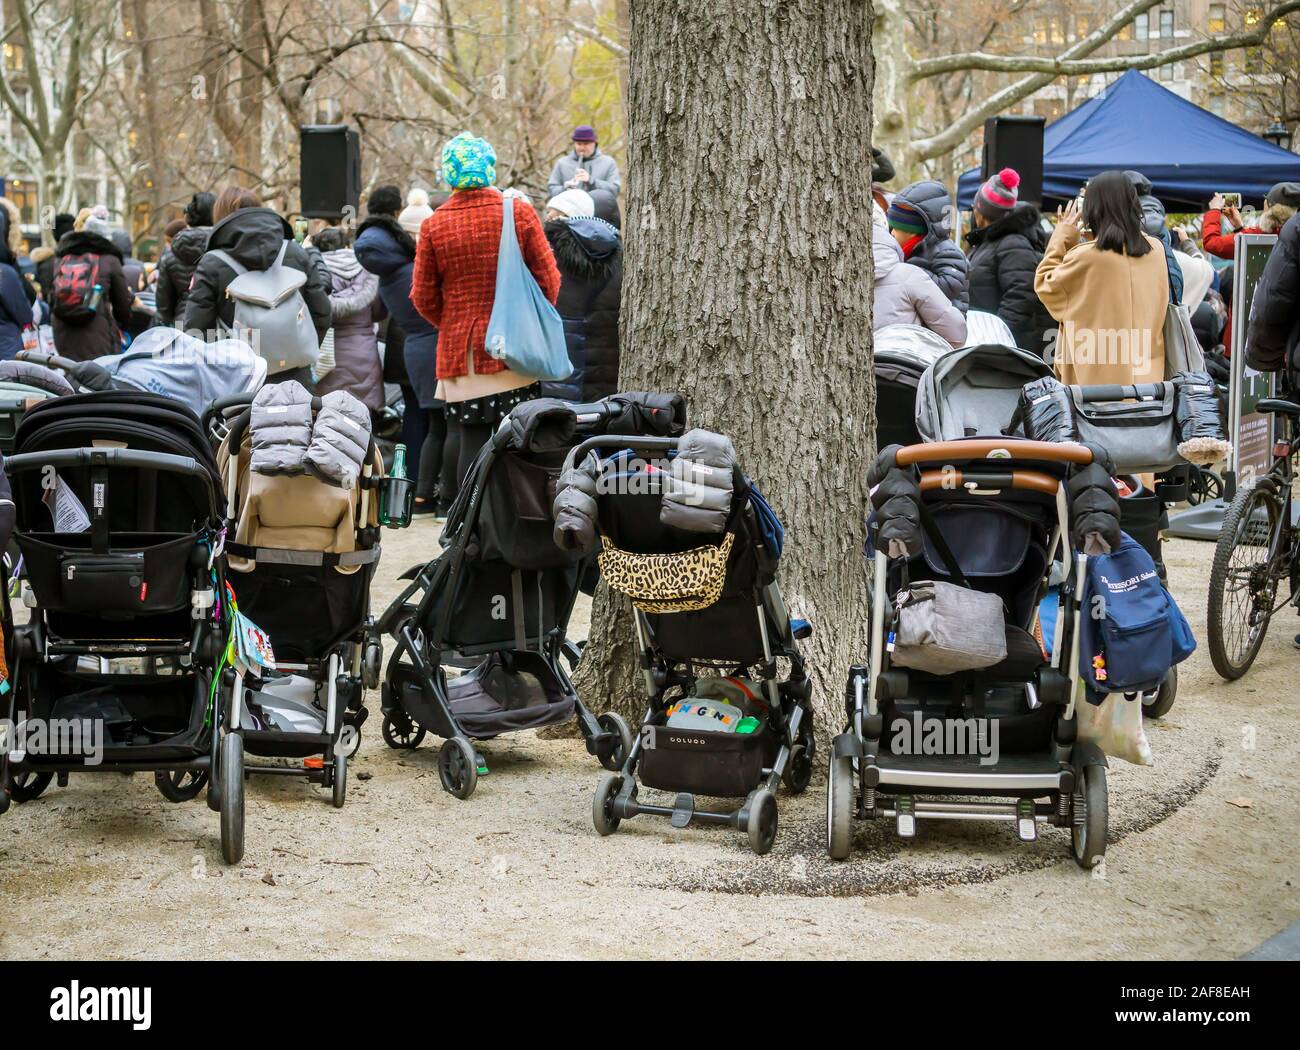 It’s stroller gridlock at the Madison Square Park tree lighting in New York on Thursday, December 5, 2019. Hundreds of nannies and mother brought out their children to enjoy the tree lighting ceremony in the park. (© Richard B. Levine) Stock Photo